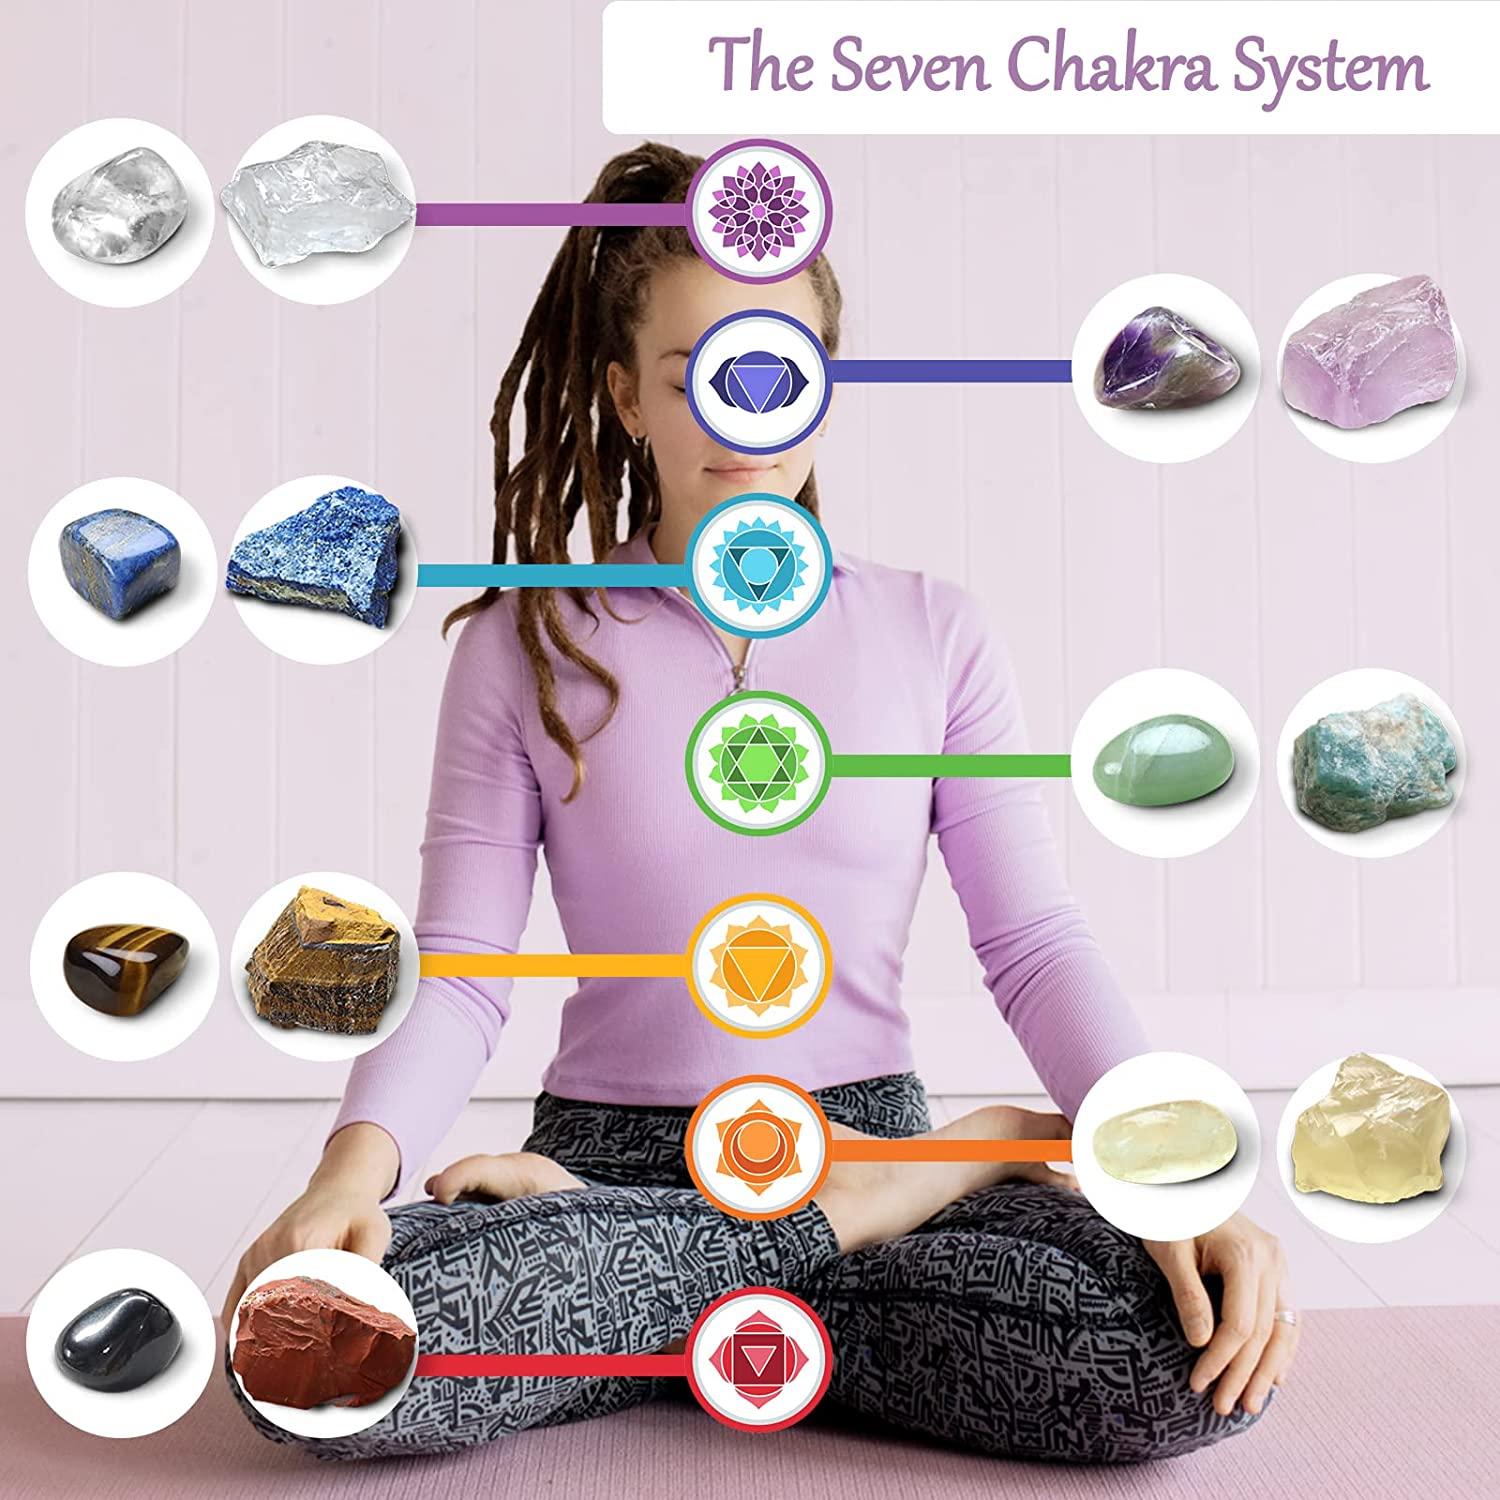 Does size matter for energy-healing crystals?